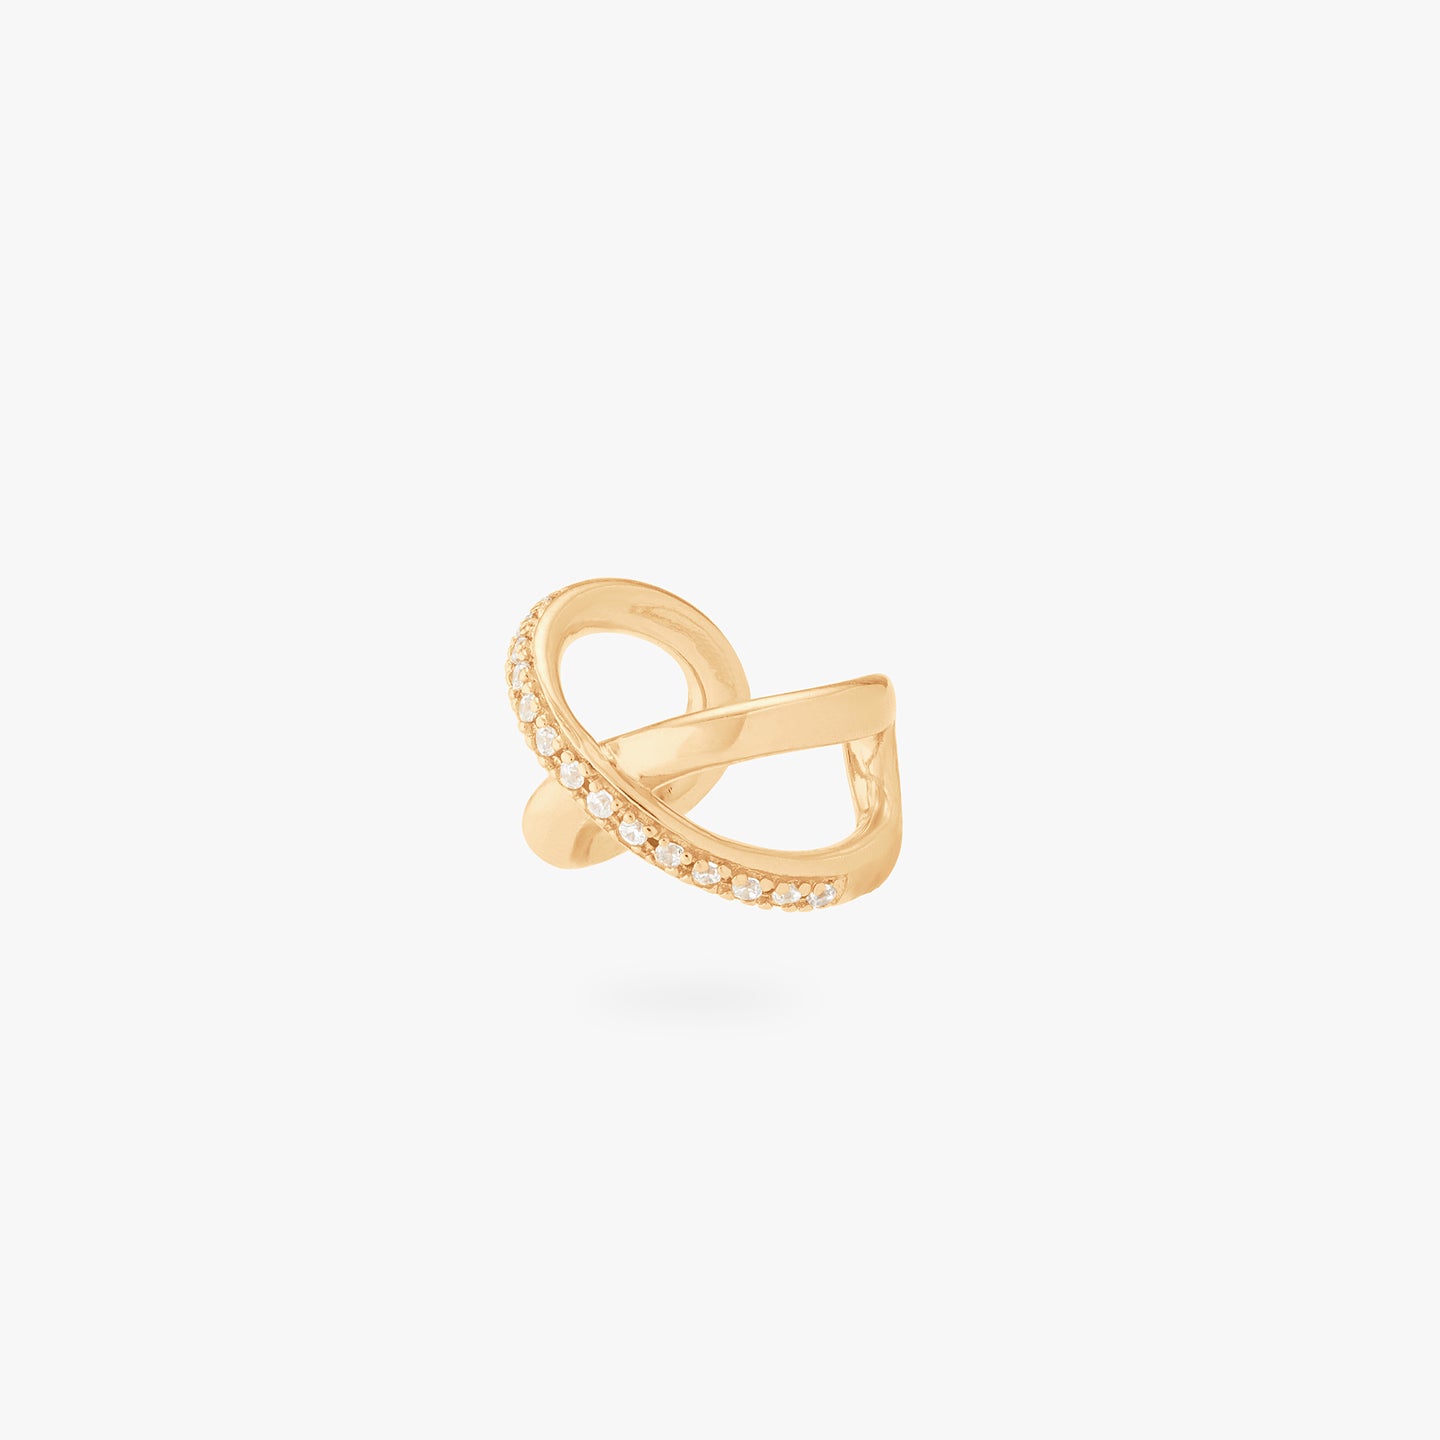 This is an image of a gold twist cuff that has one side of the twist diagonally lined with gold/clear CZs. color:null|gold/clear